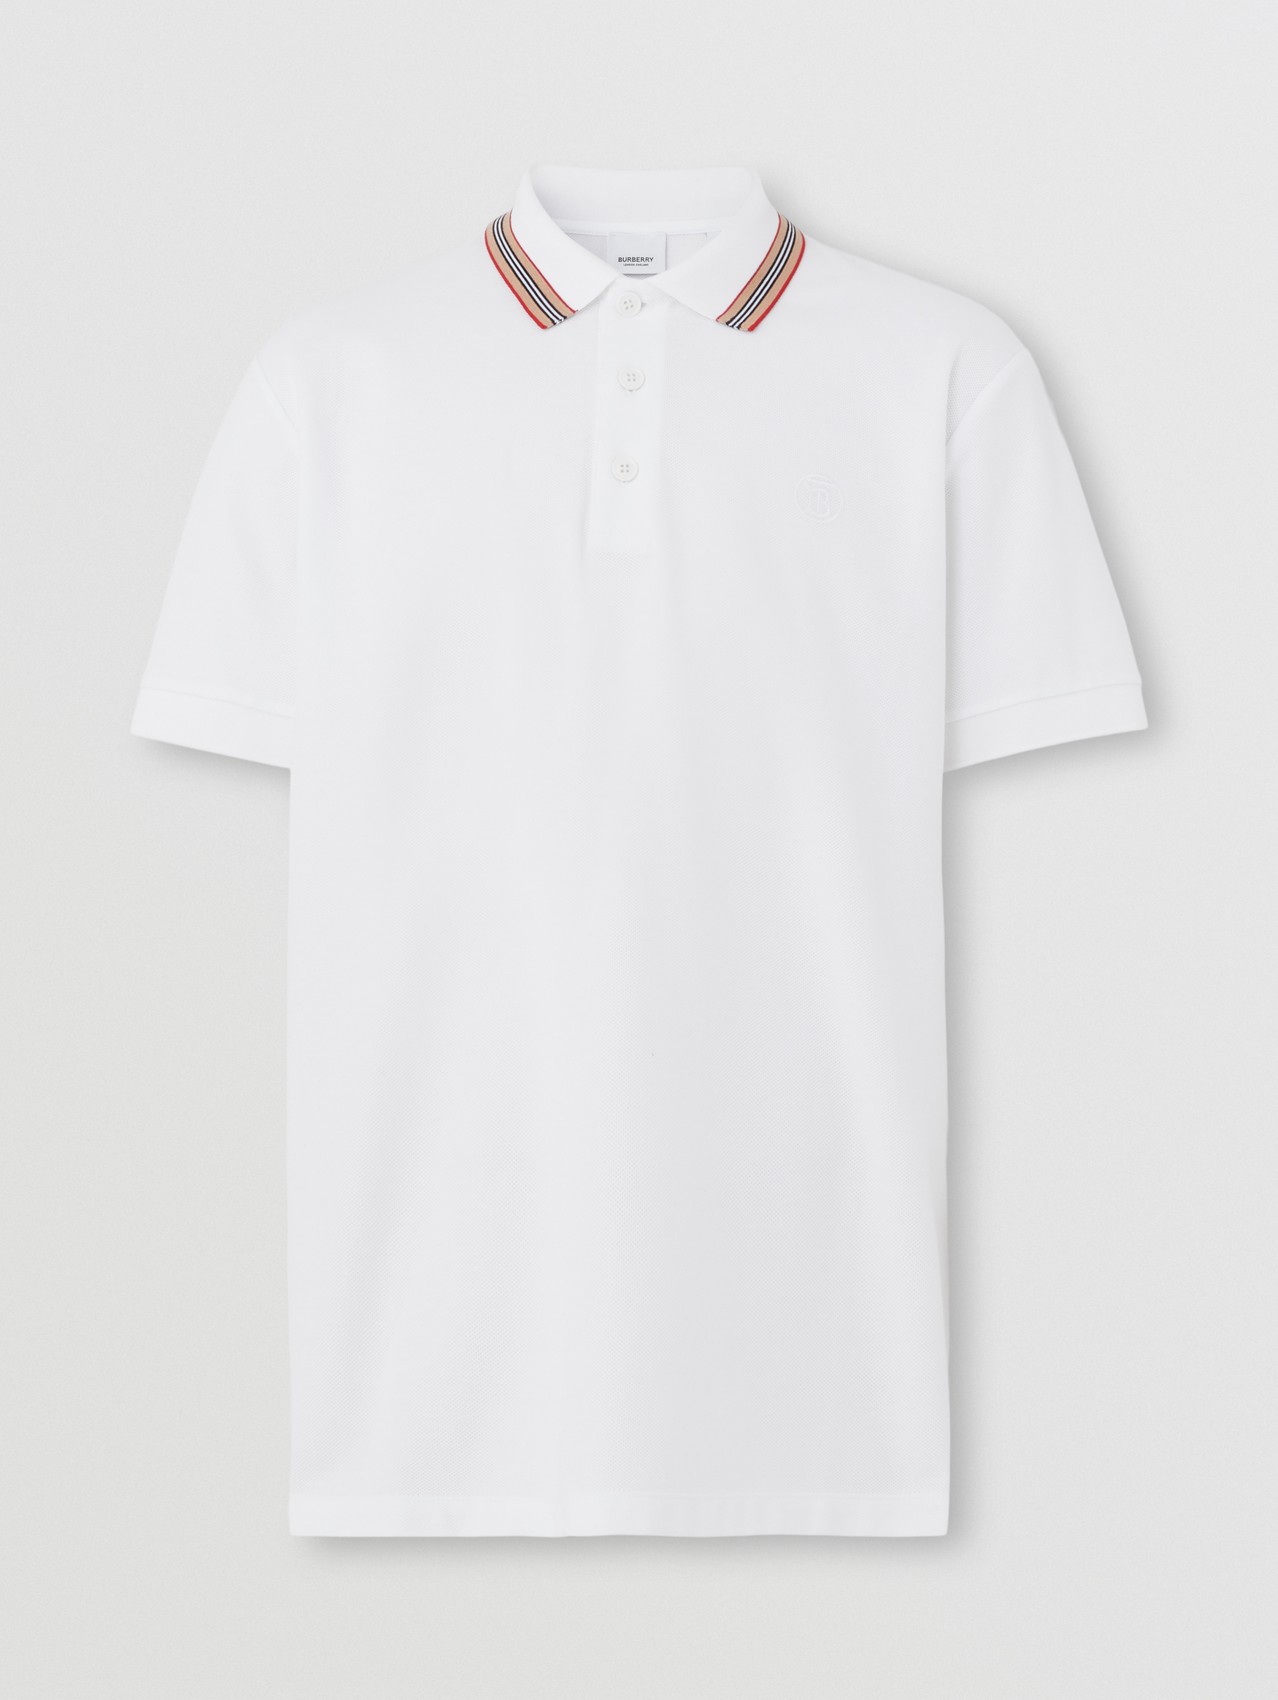 Limited Too Girls Polo Shirt 7/8 Basic White More Styles Available 